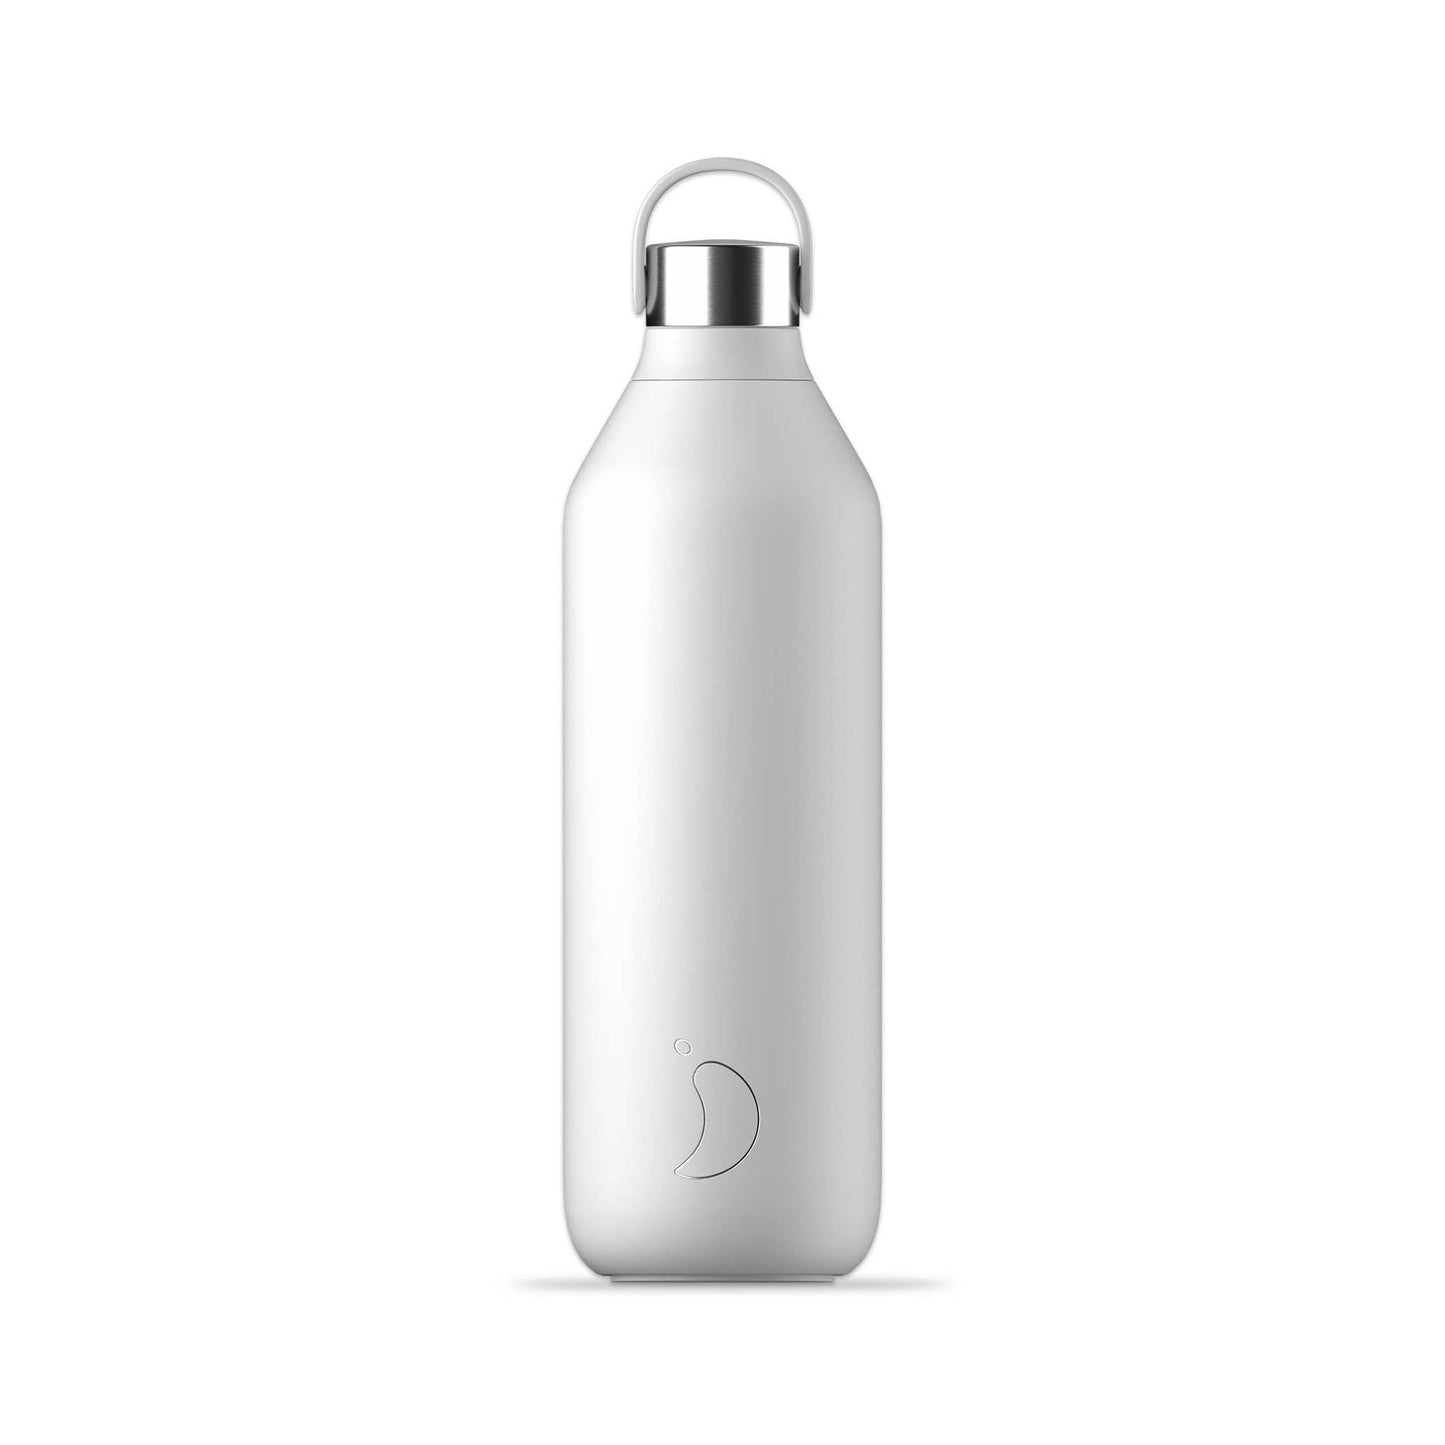 Chilly's Water Bottles Chilly's Series 2 Insulated Drinks Bottle - 1L - Arctic White